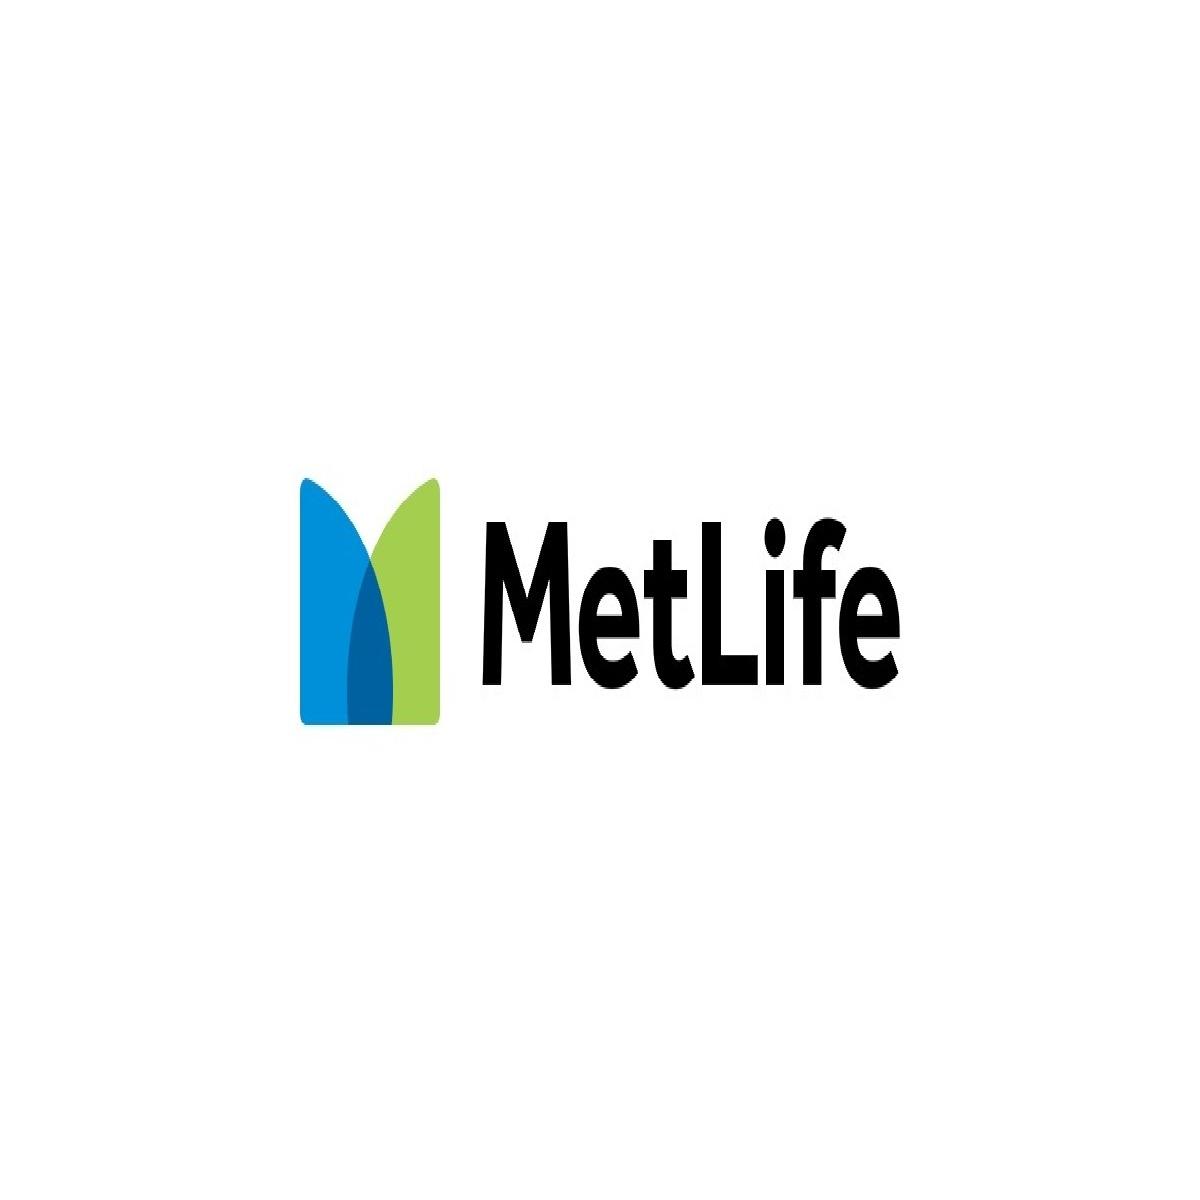 MetLife “Hacks” Recruitment to Hire Top Tech Talent in Malaysia